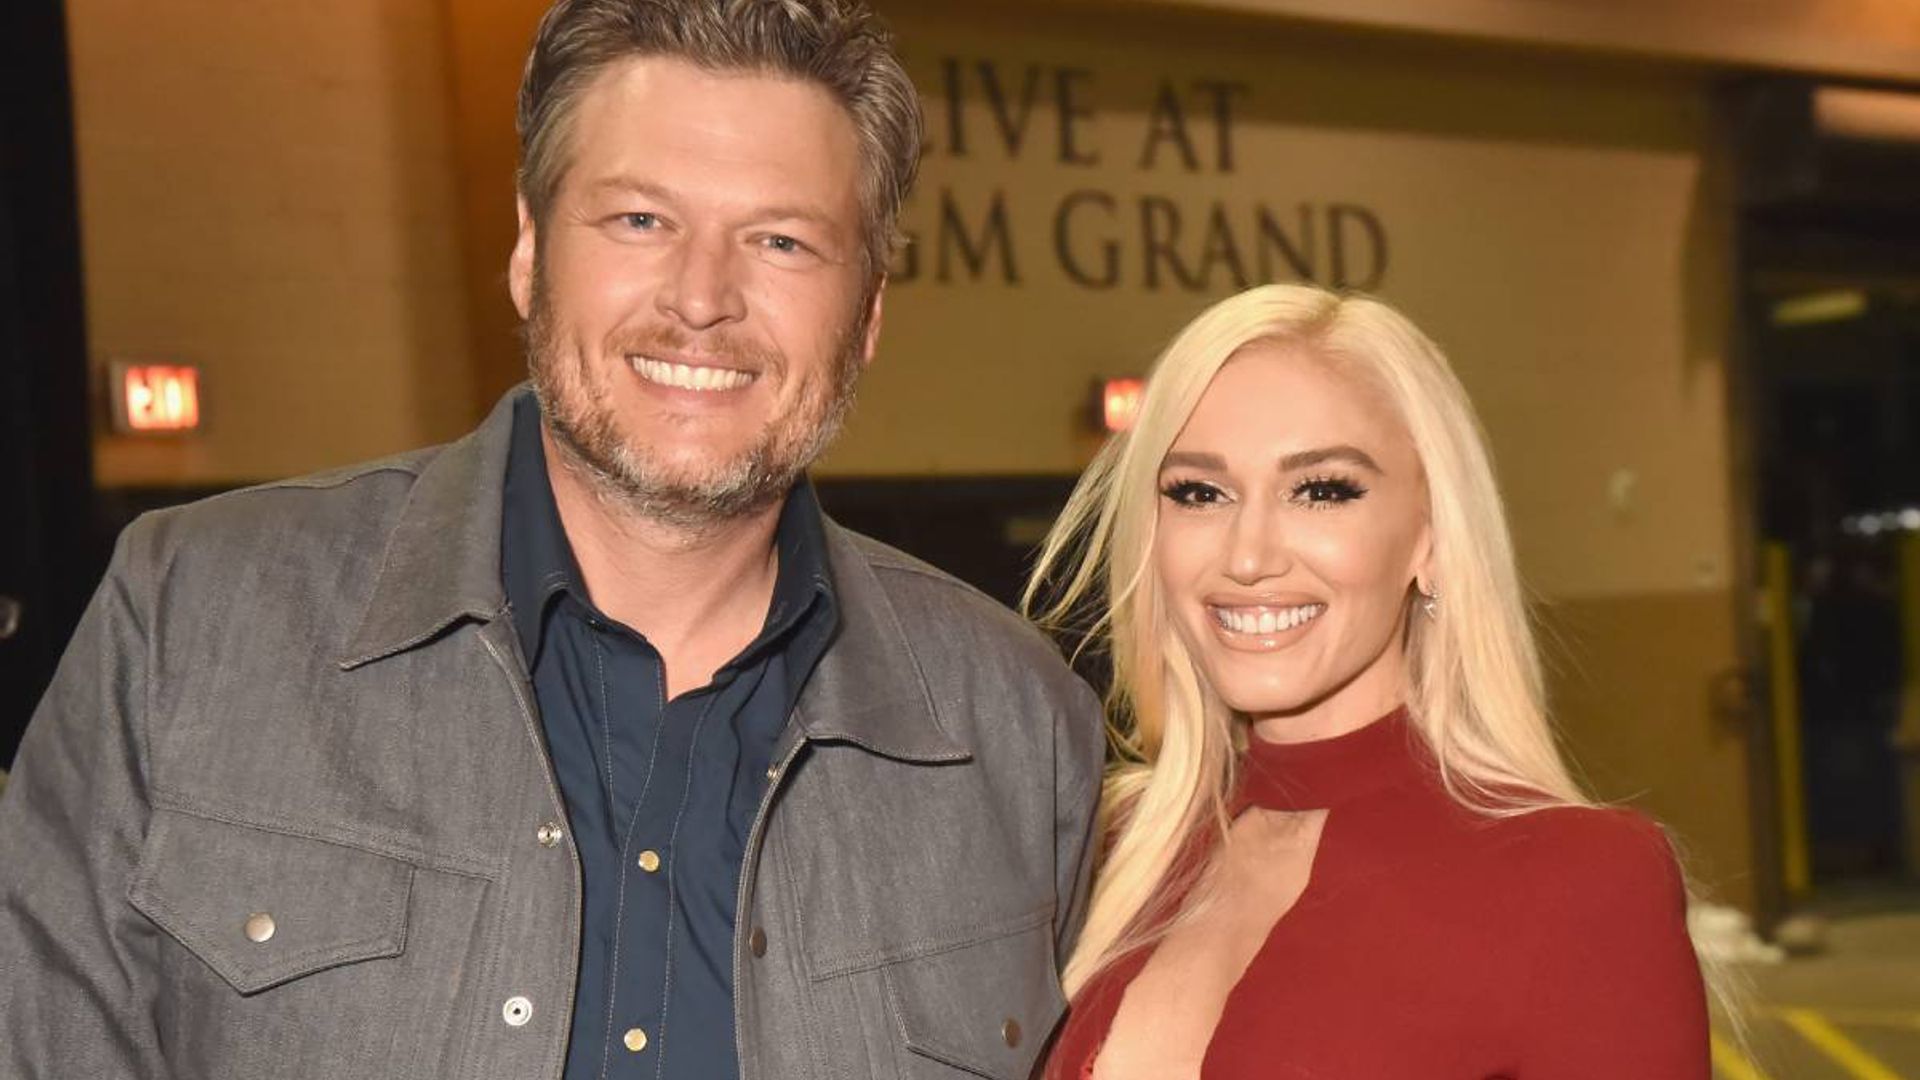 Blake Shelton looks completely different with blonde hair in epic throwback photo